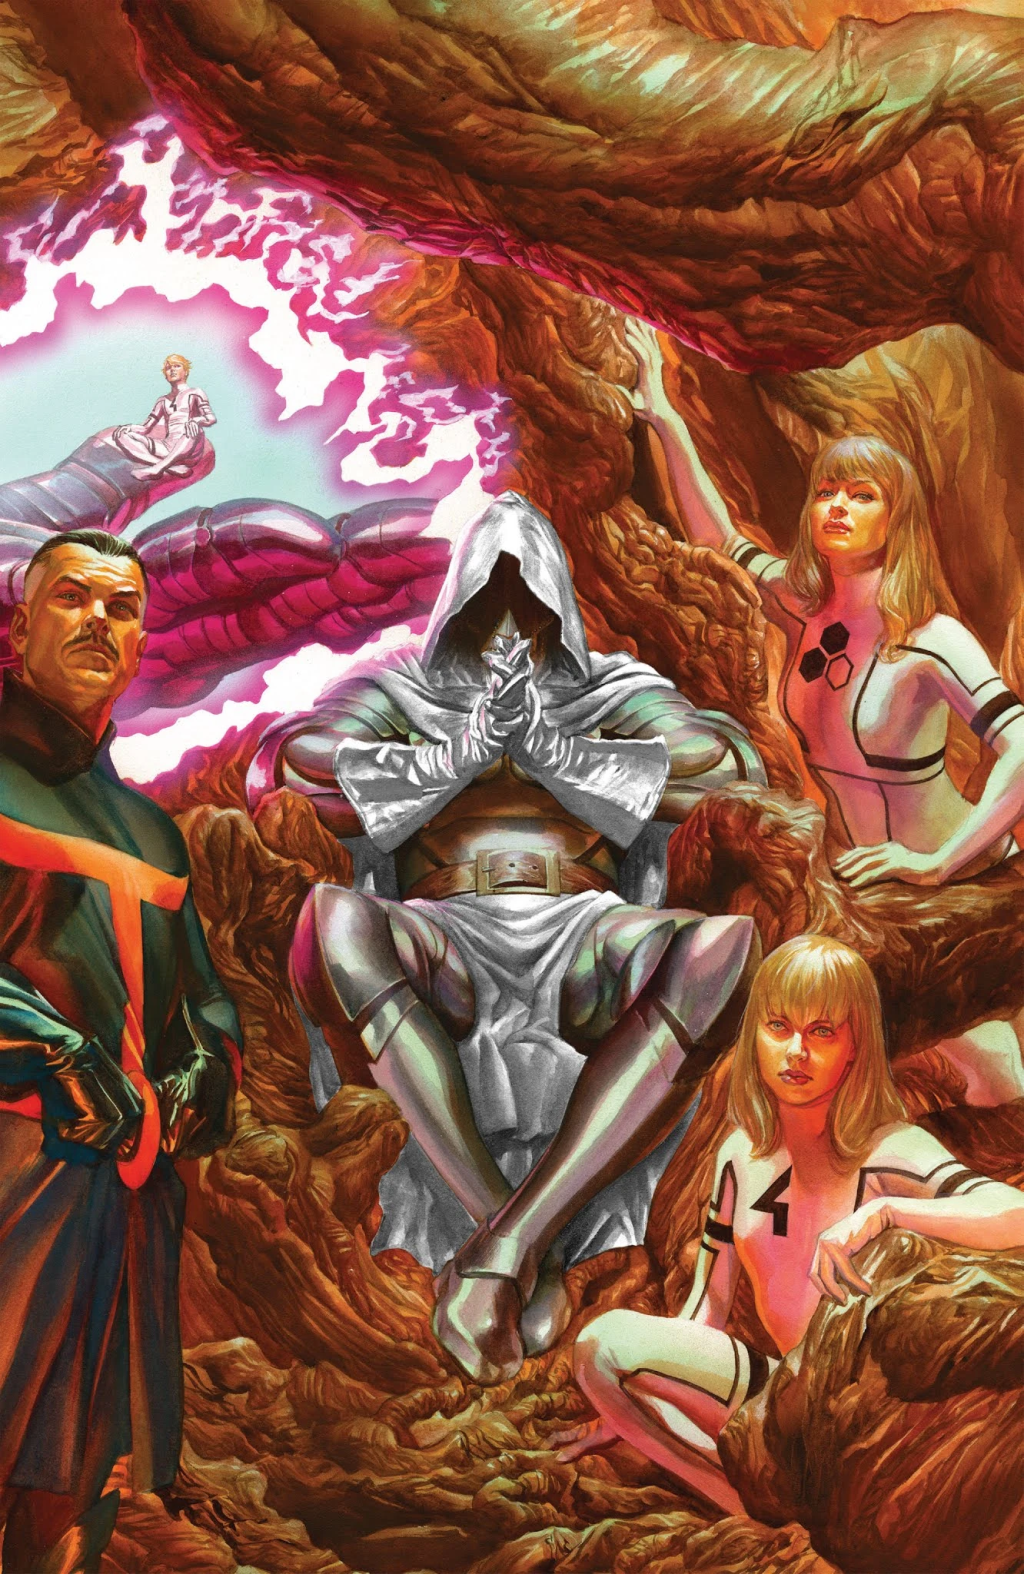 God Emperor Doom sits upon his throne, surrounded by Sheriff Strange, Susan Von Doom, and Valeria Von Doom on Alex Ross' cover to Secret Wars Vol. 1 #4 "All the Angels Sing, All the Devils Dance" (2015), Marvel Comics